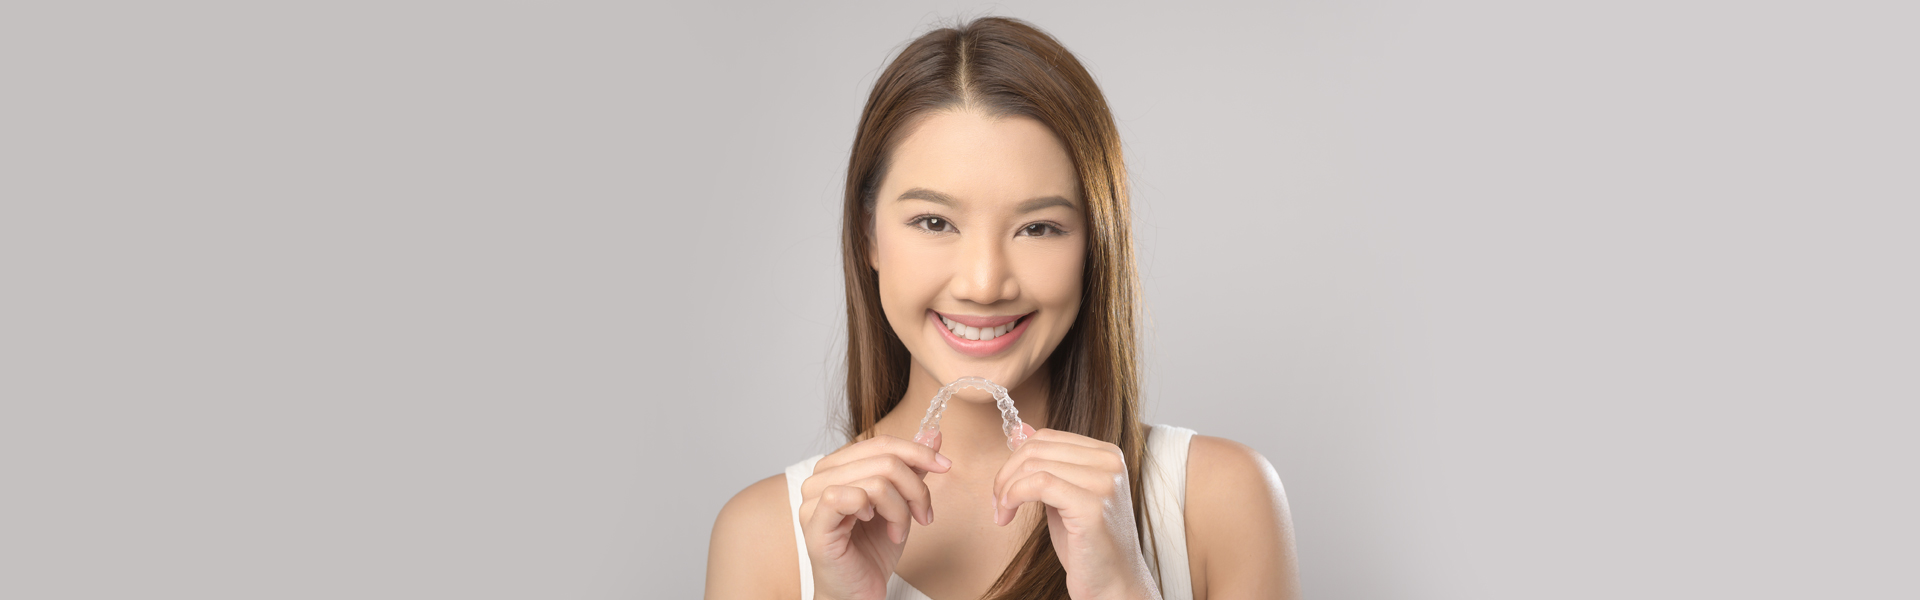 The Advantages of Invisalign: Beyond Aesthetics to Improved Oral Health